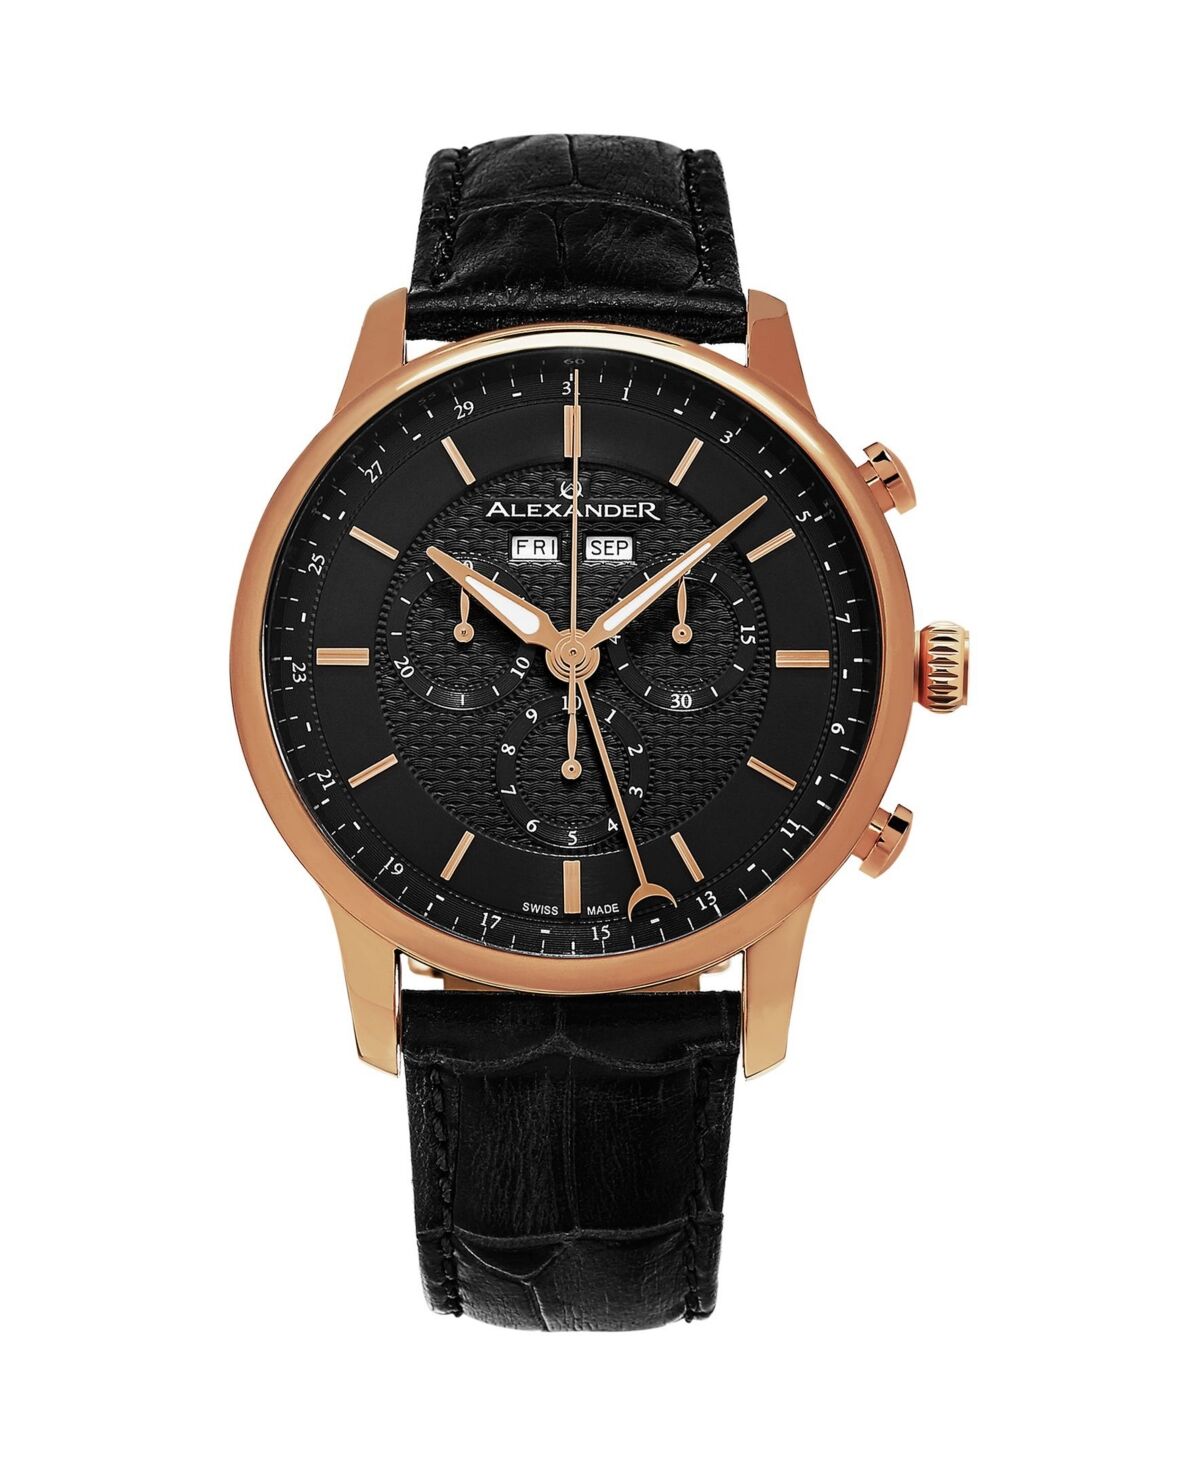 Stuhrling Alexander Watch A101-04, Stainless Steel Rose Gold Tone Case on Black Embossed Genuine Leather Strap - Black